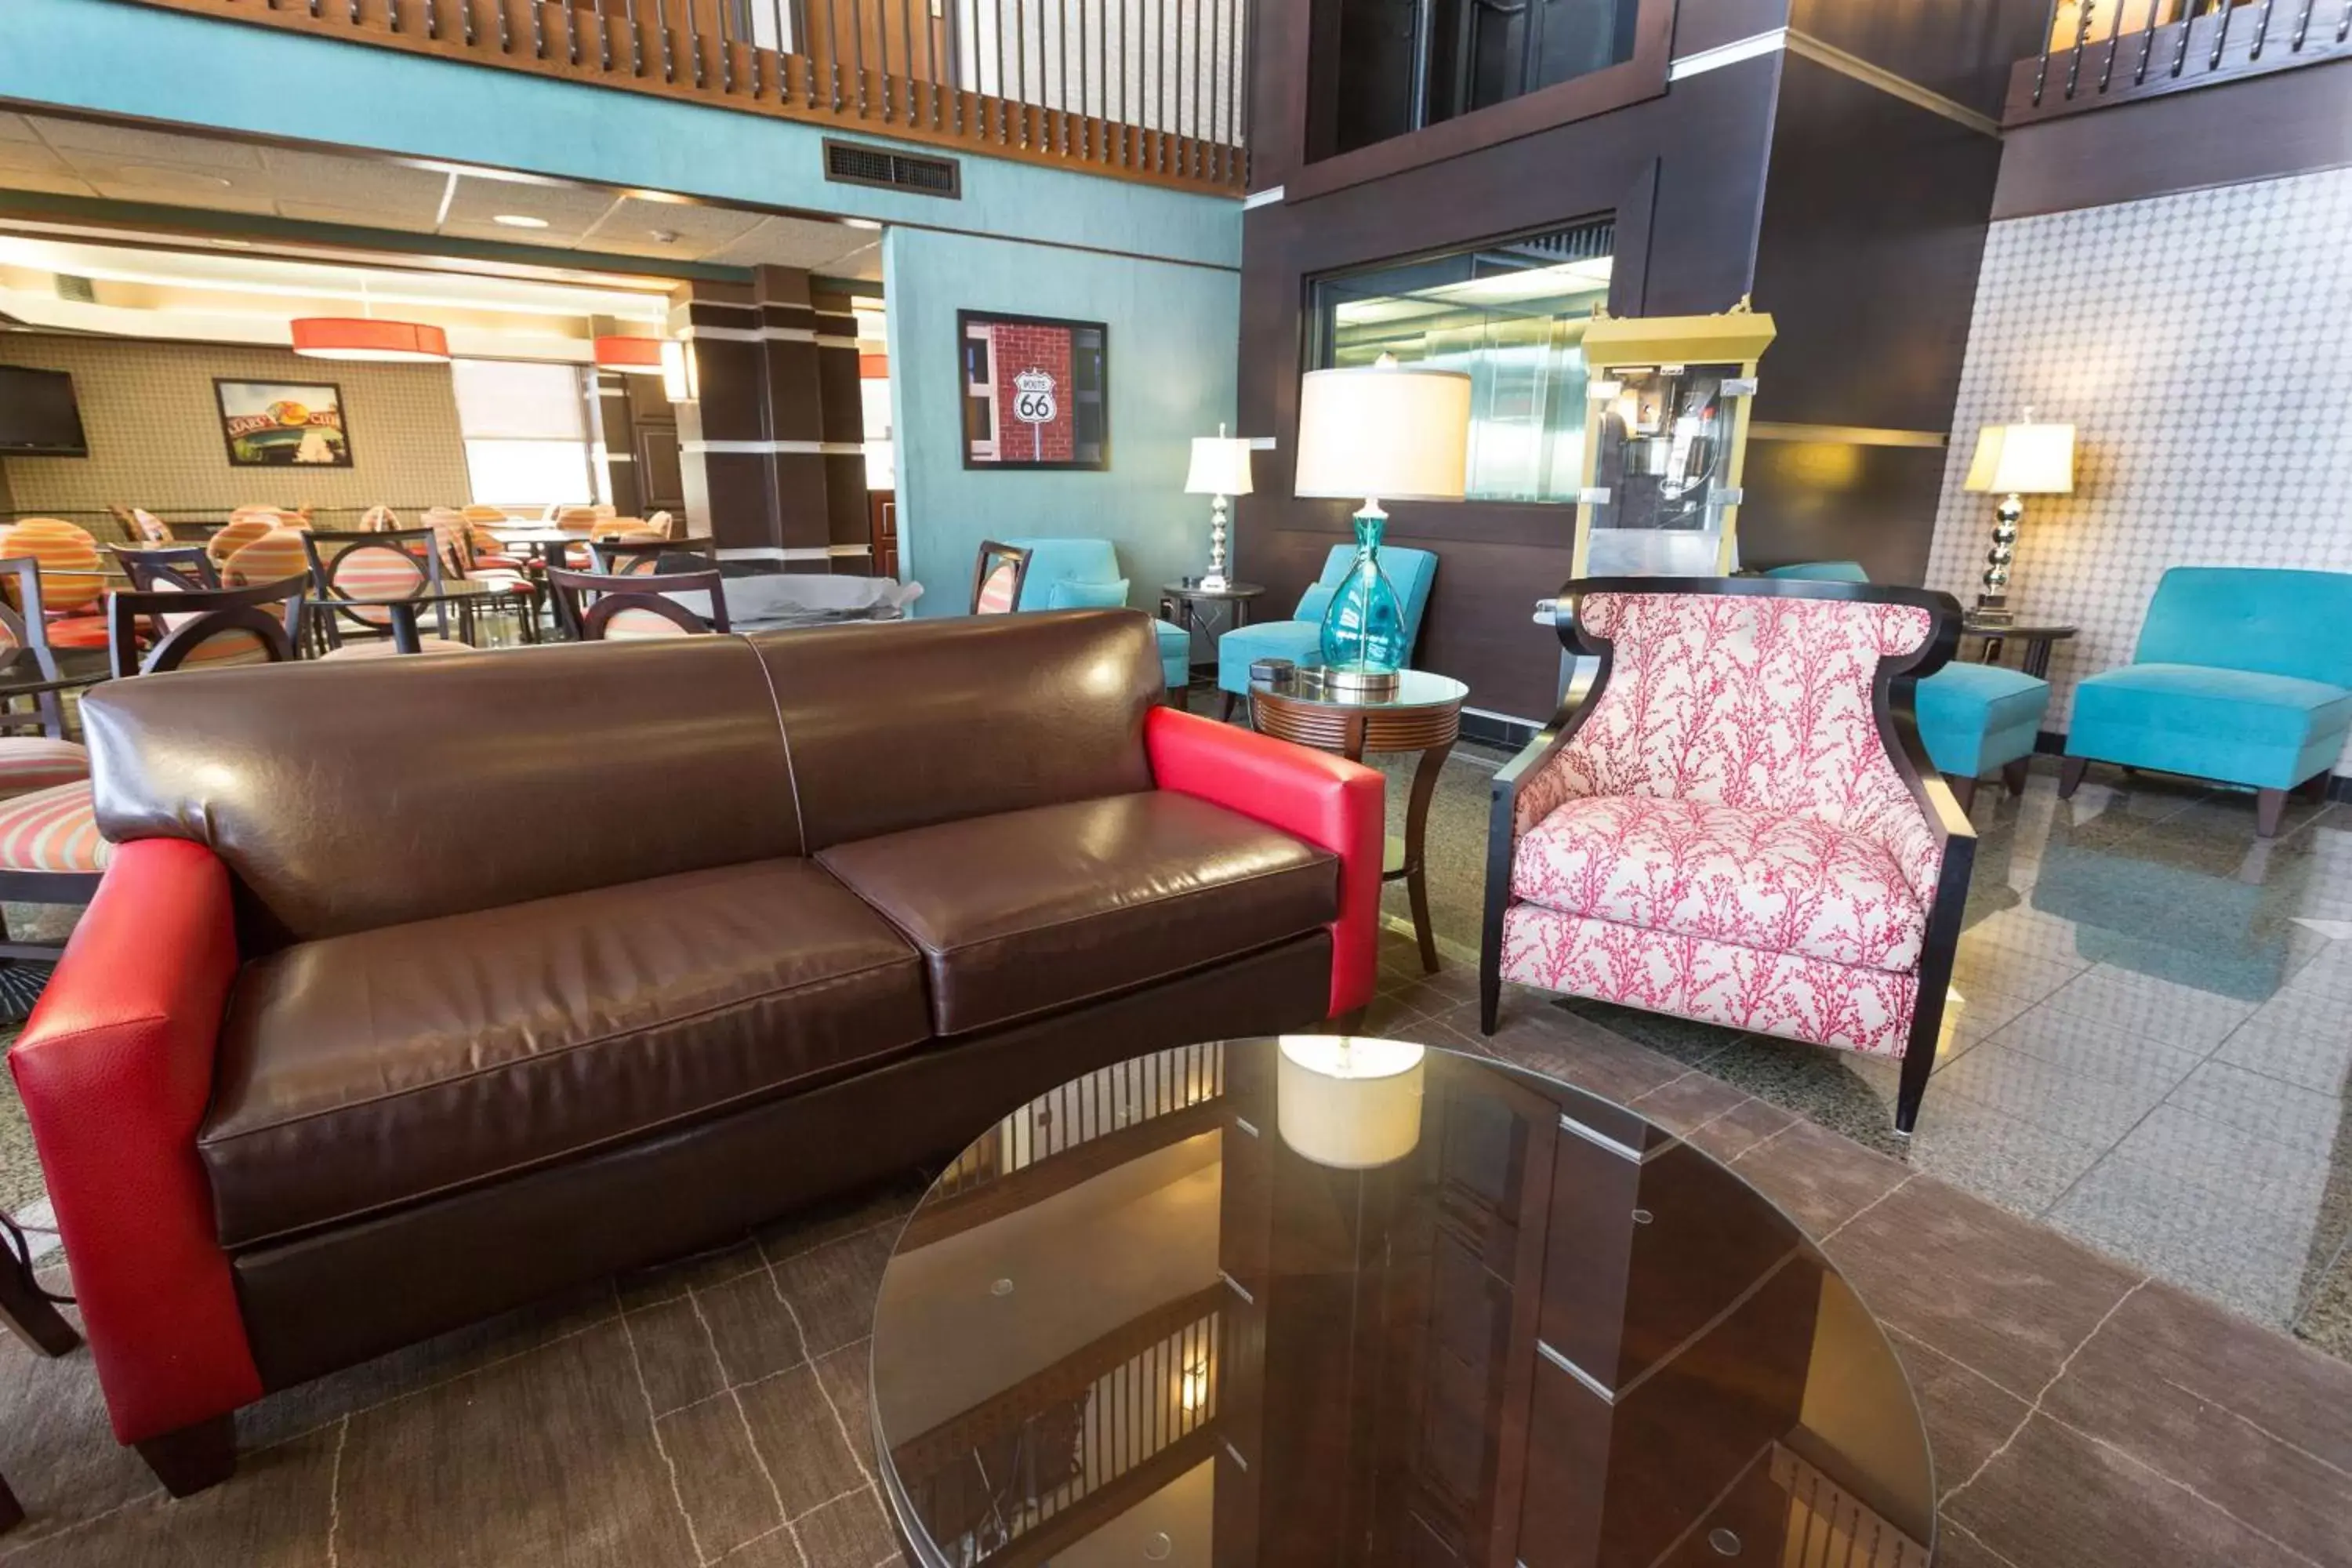 Lobby or reception in Drury Inn & Suites Springfield MO